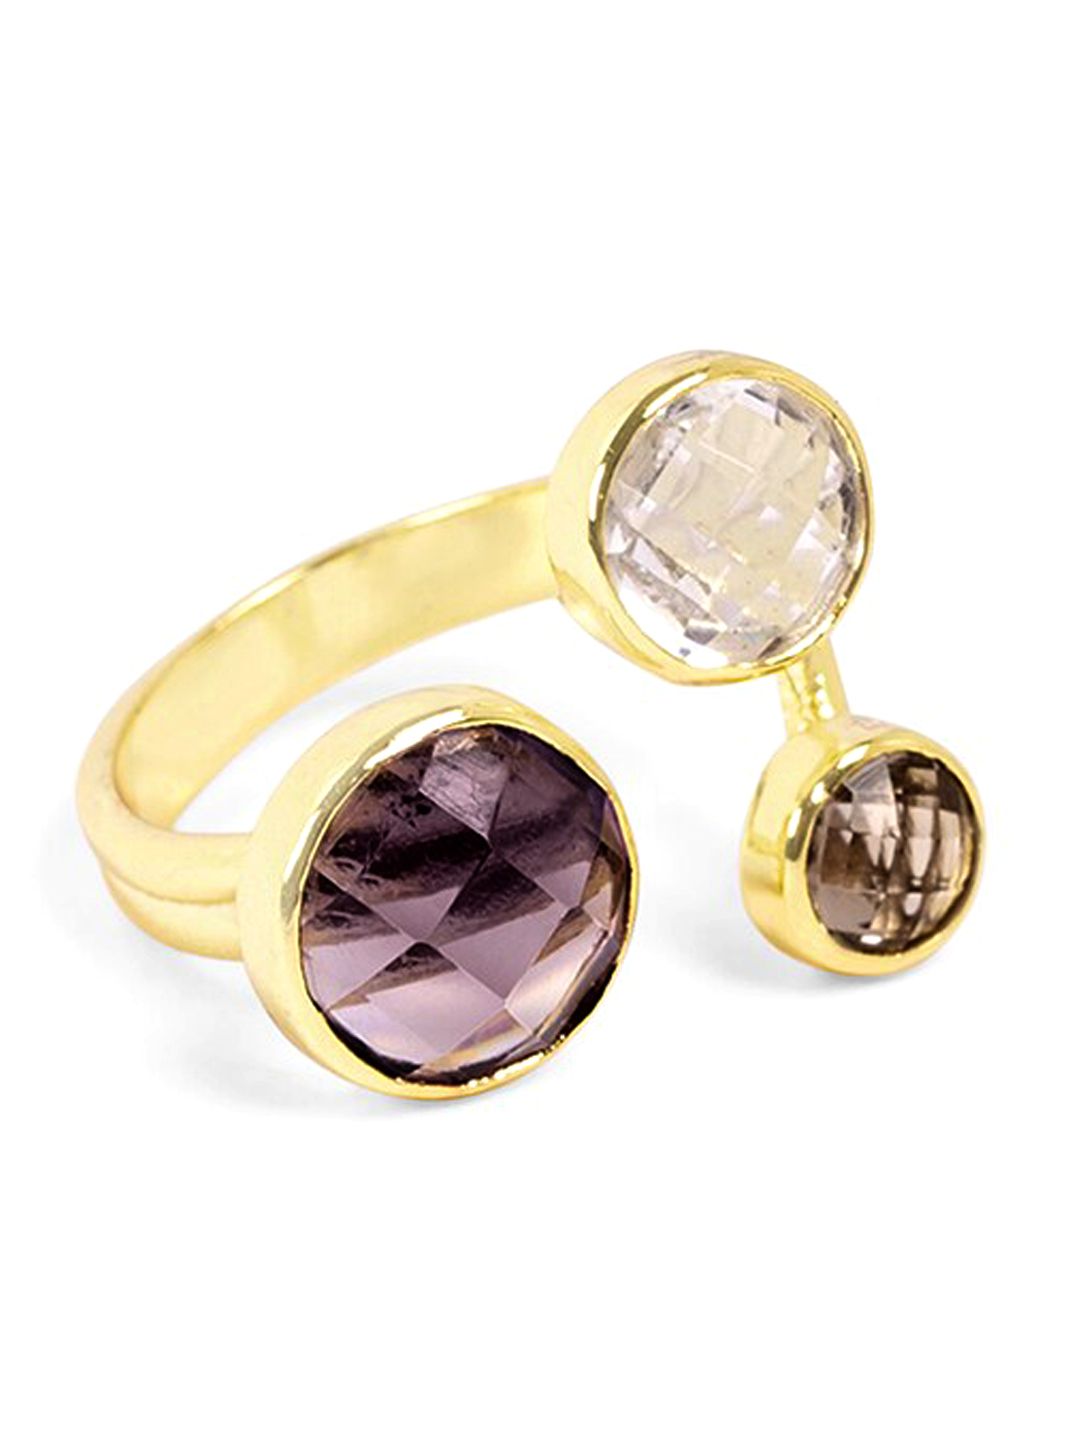 Mikoto by FableStreet Gold-Plated White & Purple Quartz-Studded Finger Ring Price in India